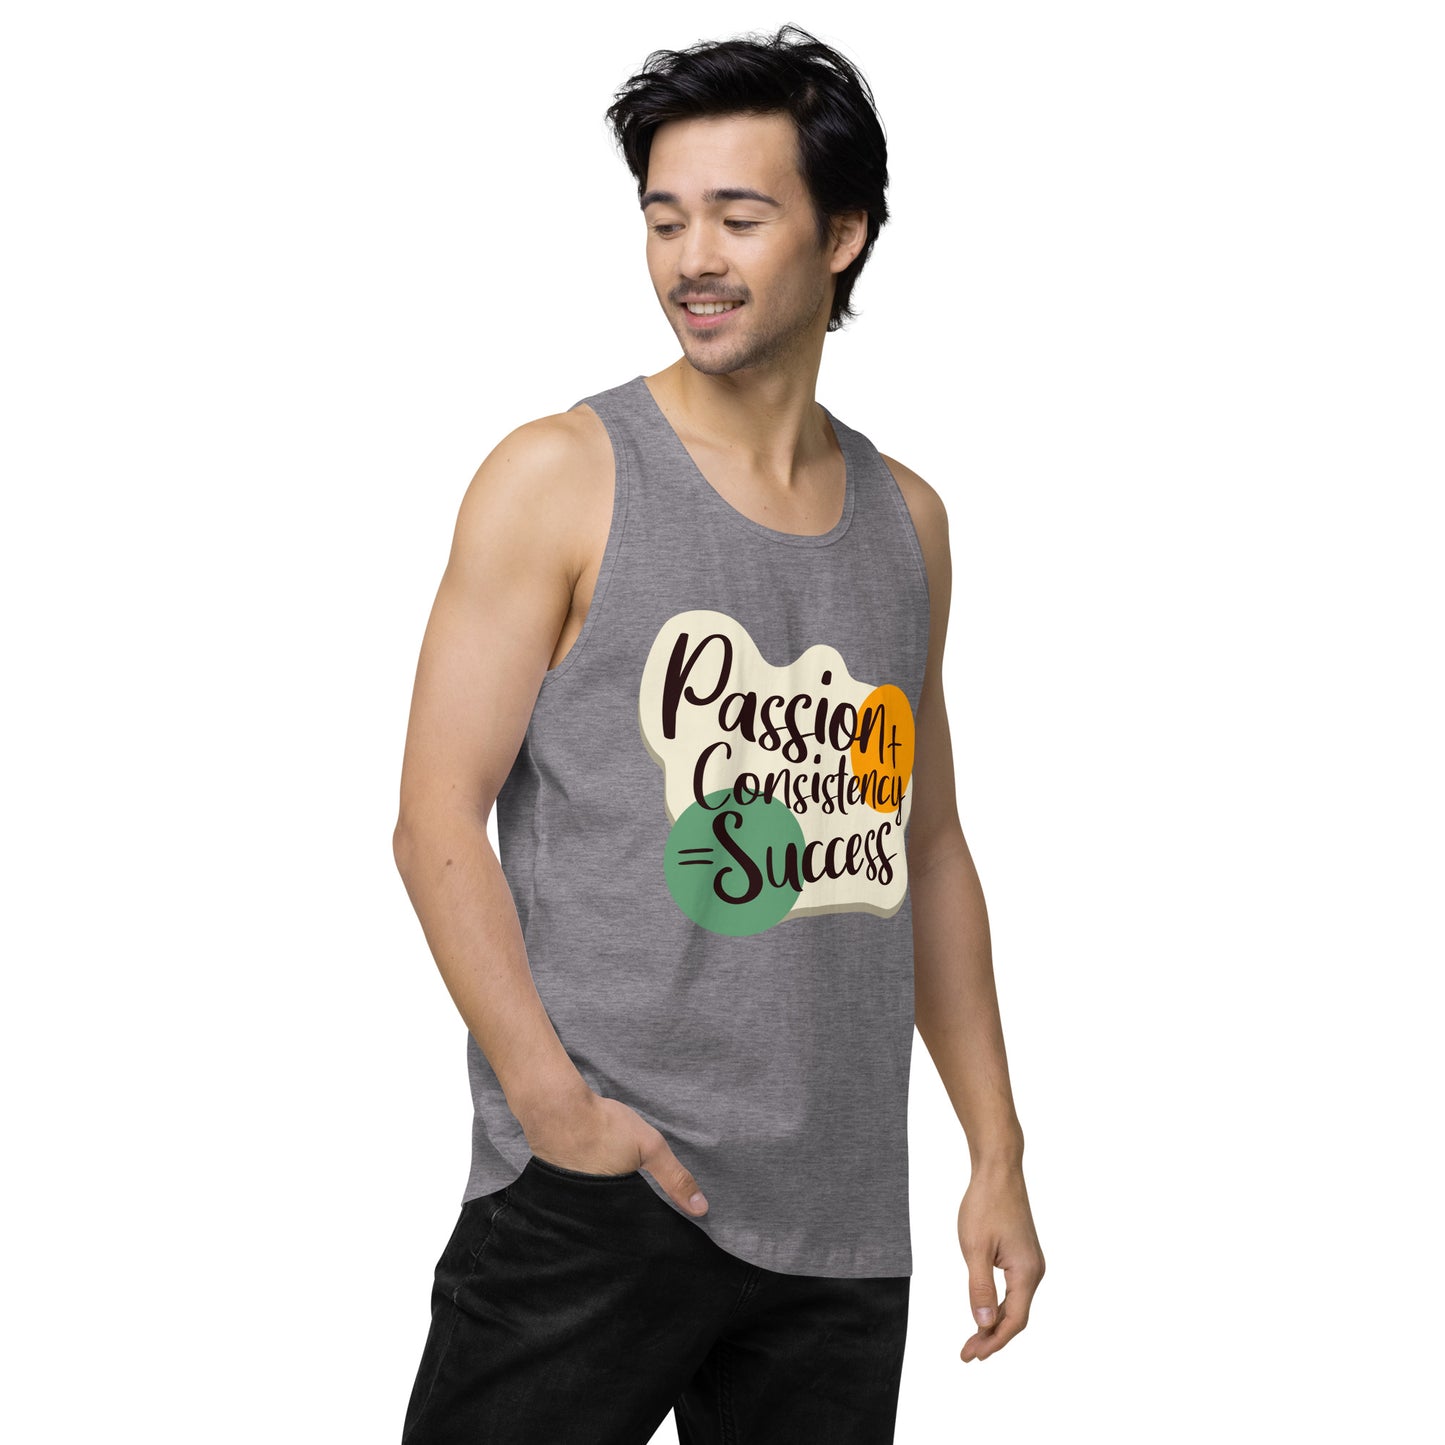 Passion and Consistency premium tank top